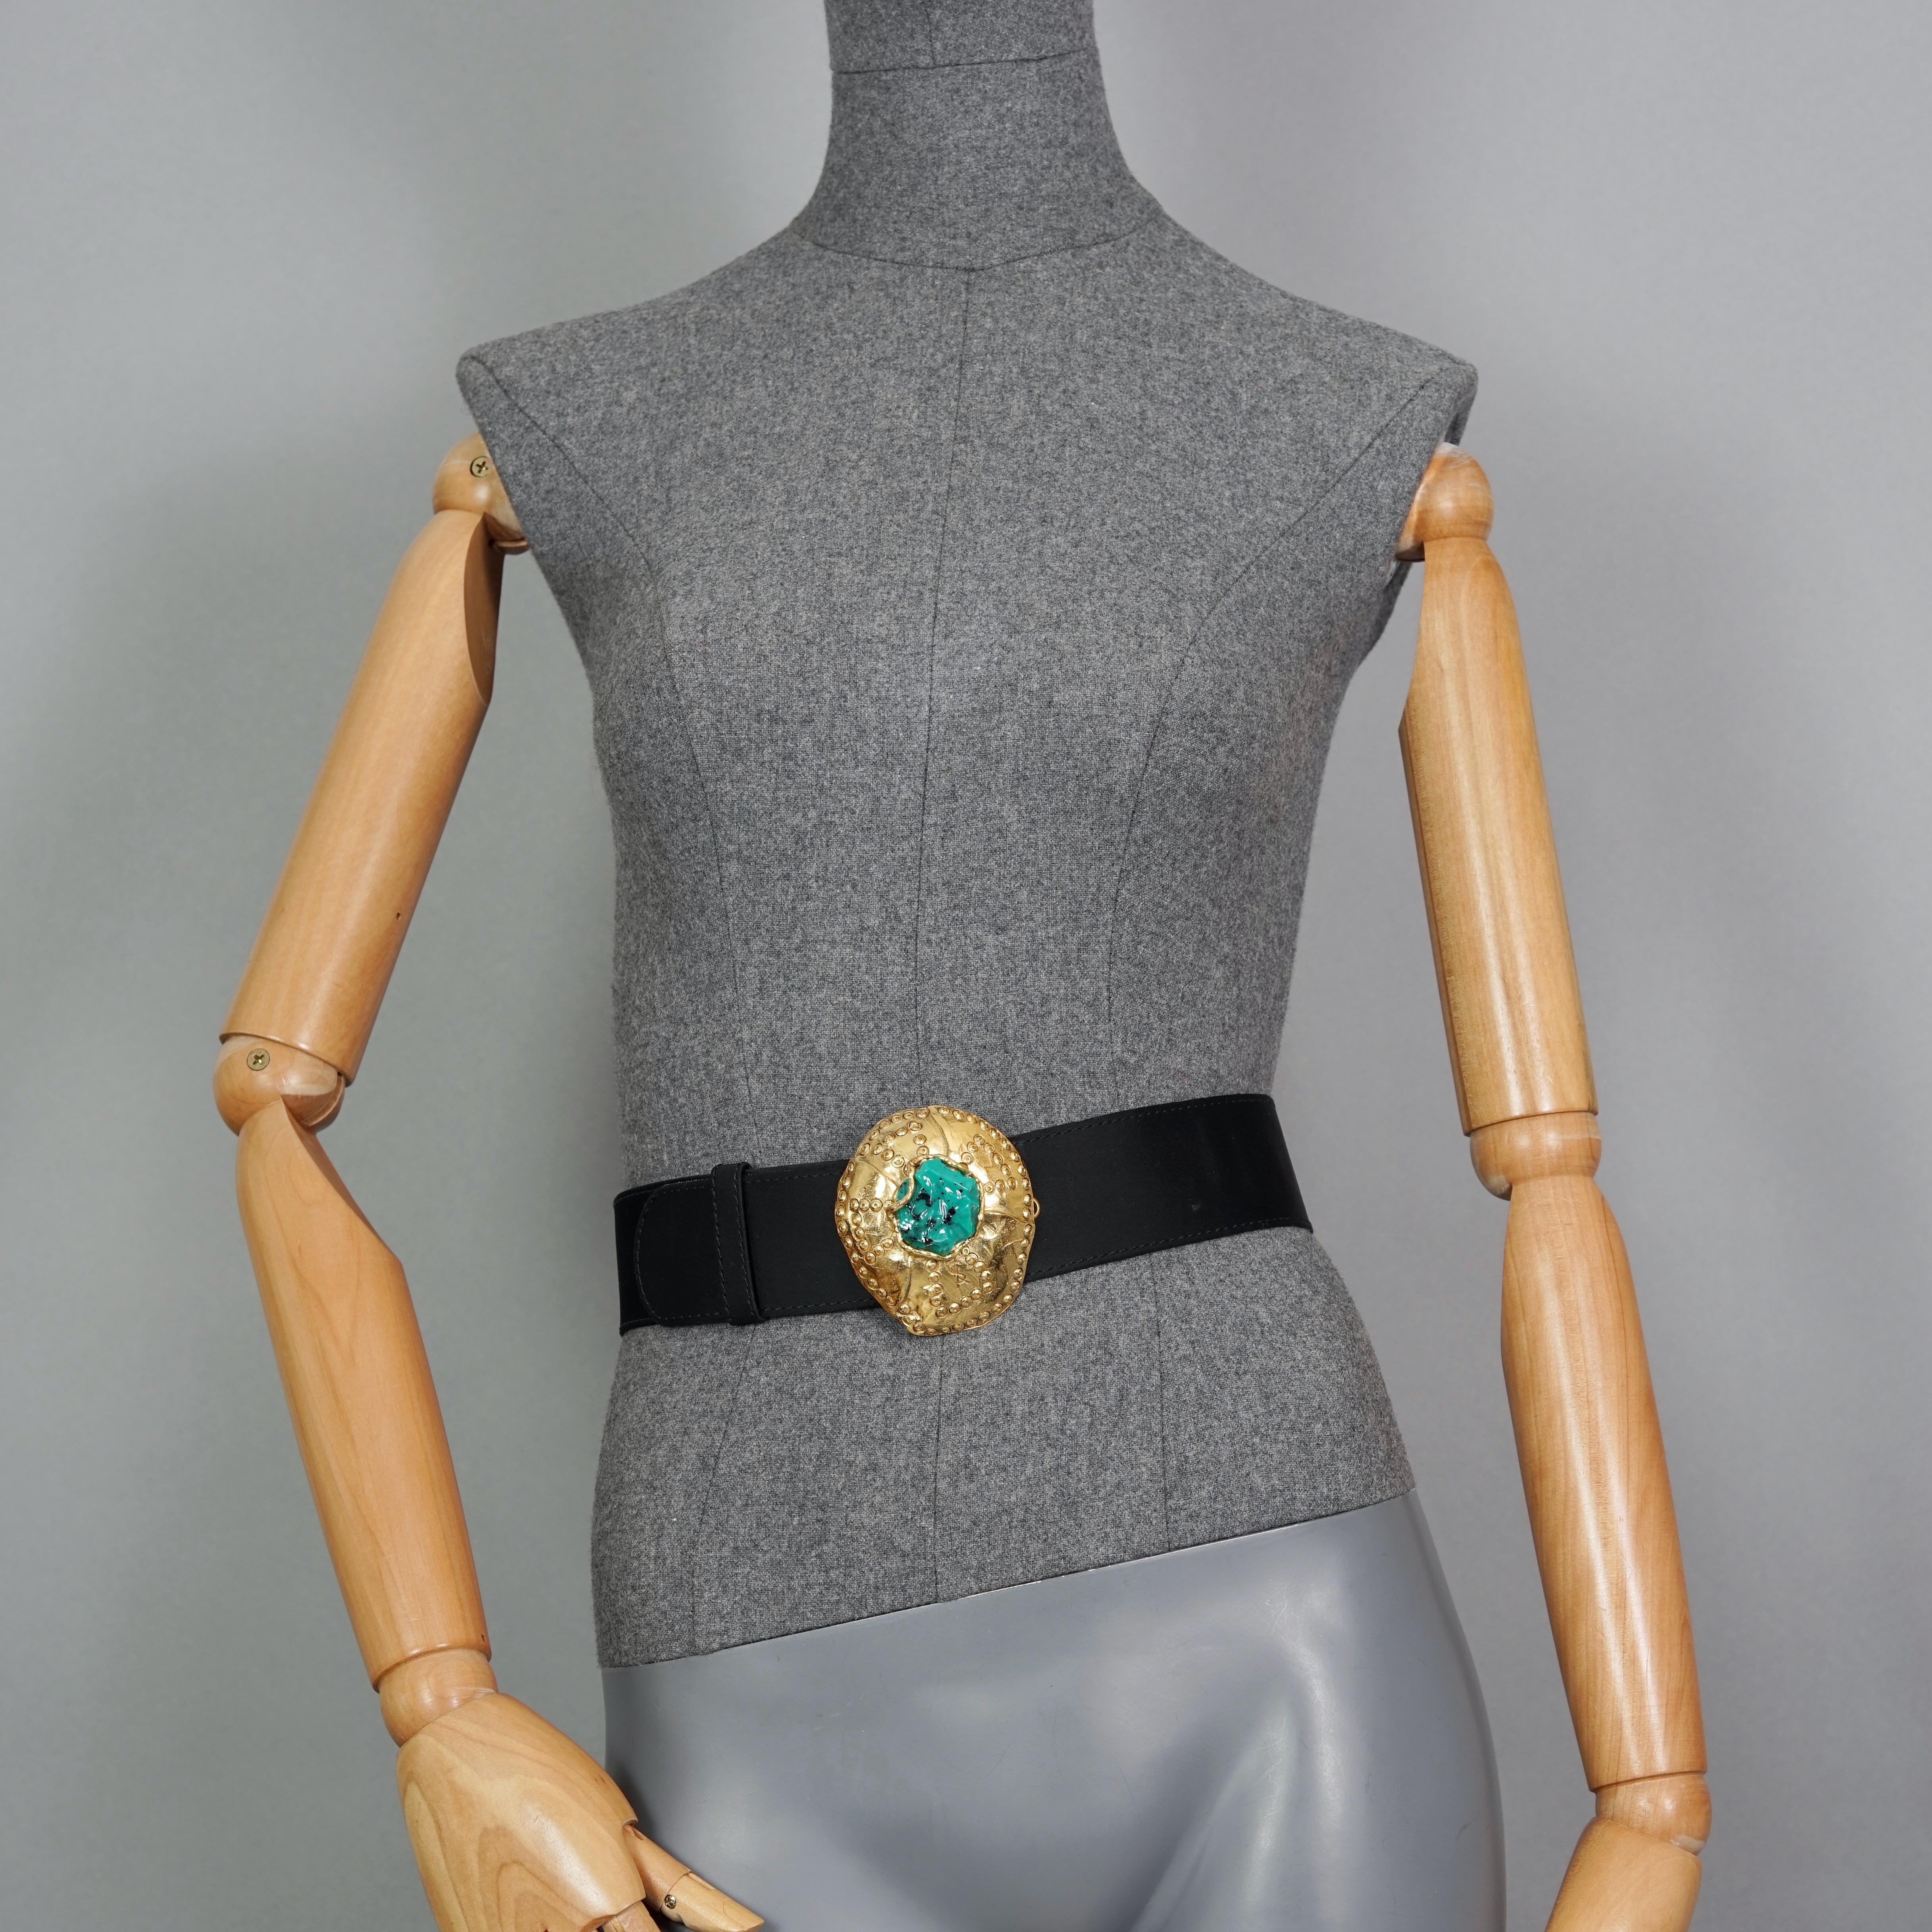 Vintage YVES SAINT LAURENT by Goossens Ethnic Disc Turquoise Buckle Silk Belt

Measurements:
Height Buckle: 2.99 inches (7.6 cm)
Height Strap: 1.92 inches (4.9 cm)
Wearable Length: 28 inches (71 cm), 29 inches (73.5 cm) and 30 inches (76